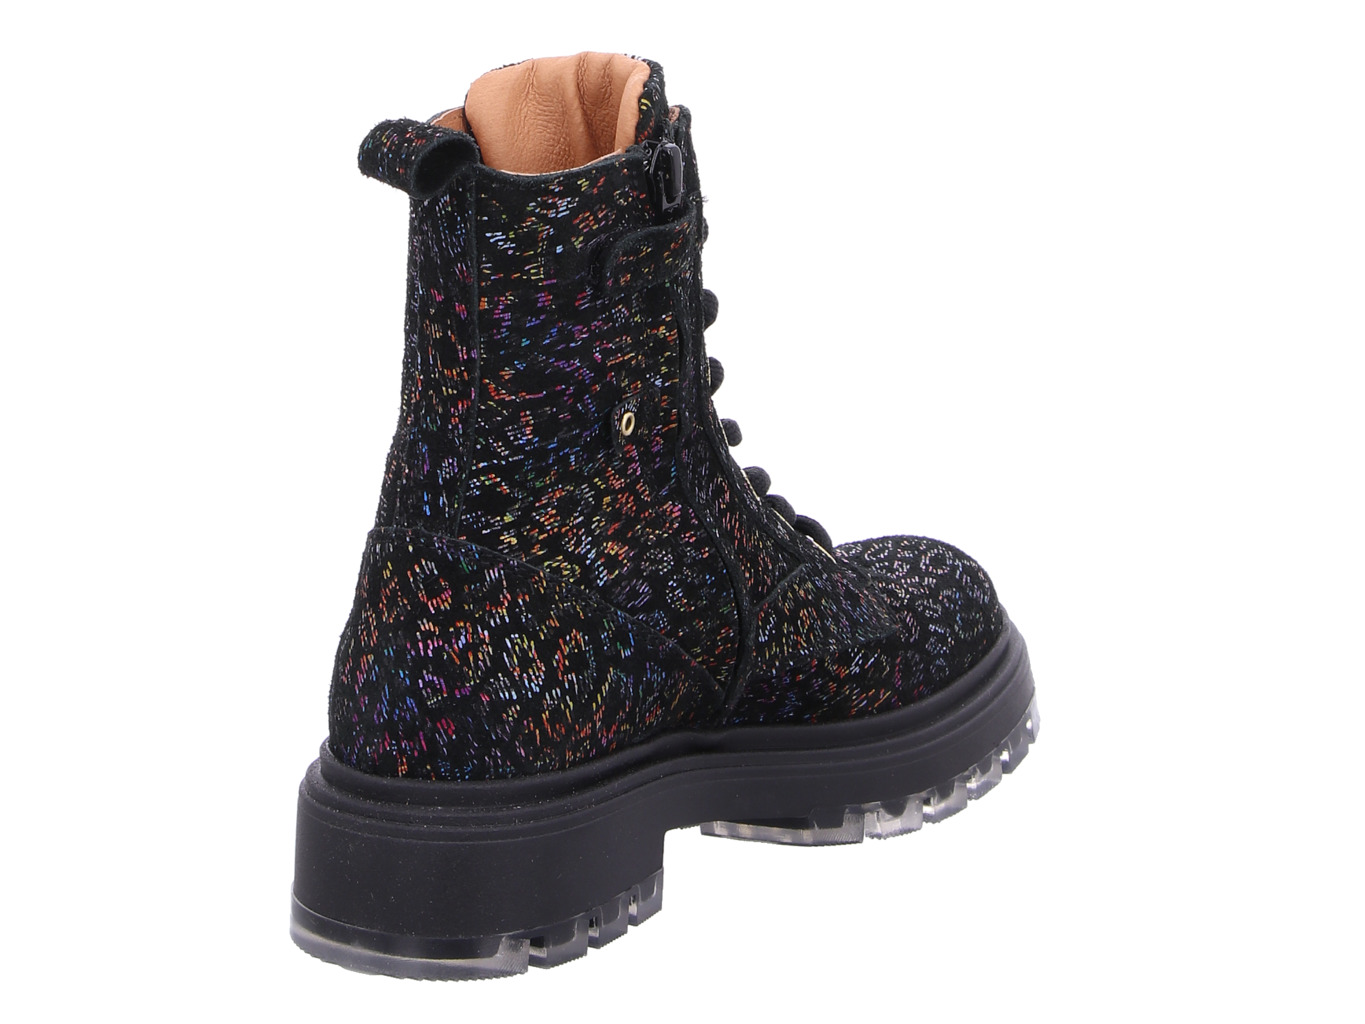 develab_girls_mid_boot_laces_41444_929_2213